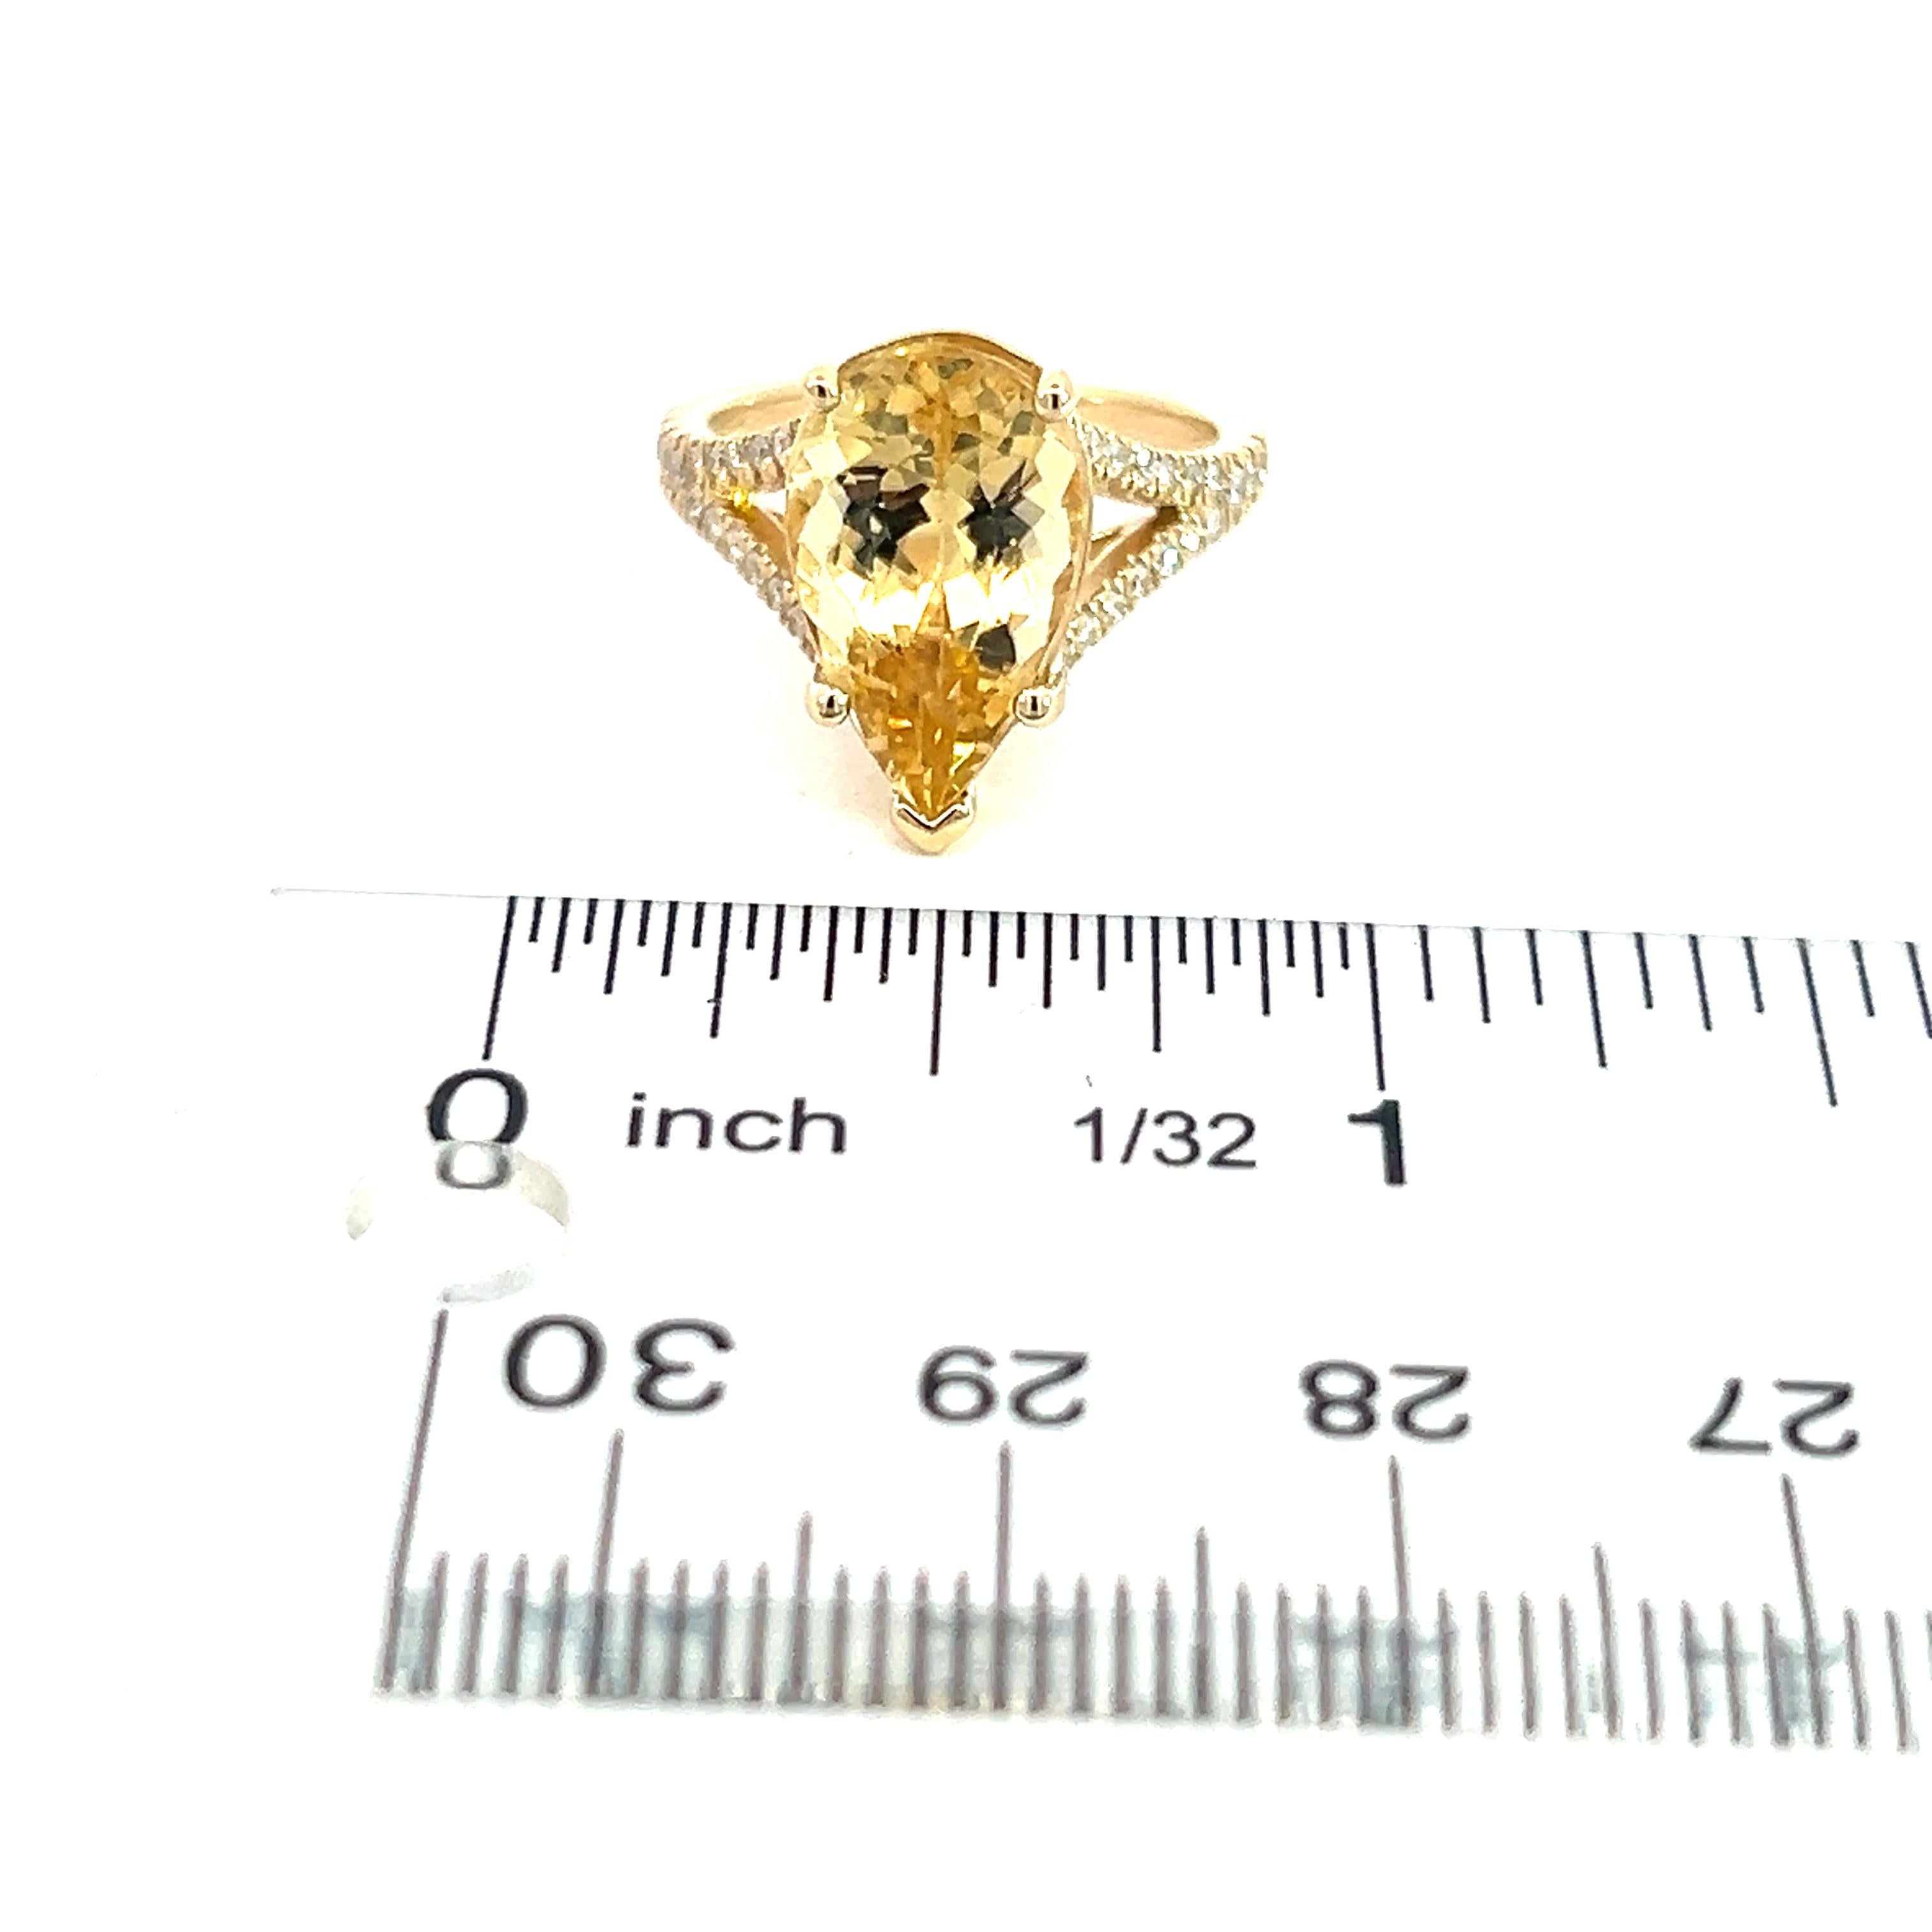 Natural Citrine Diamond Ring 6.5 14k Y Gold 4.79 TCW Certified For Sale 14